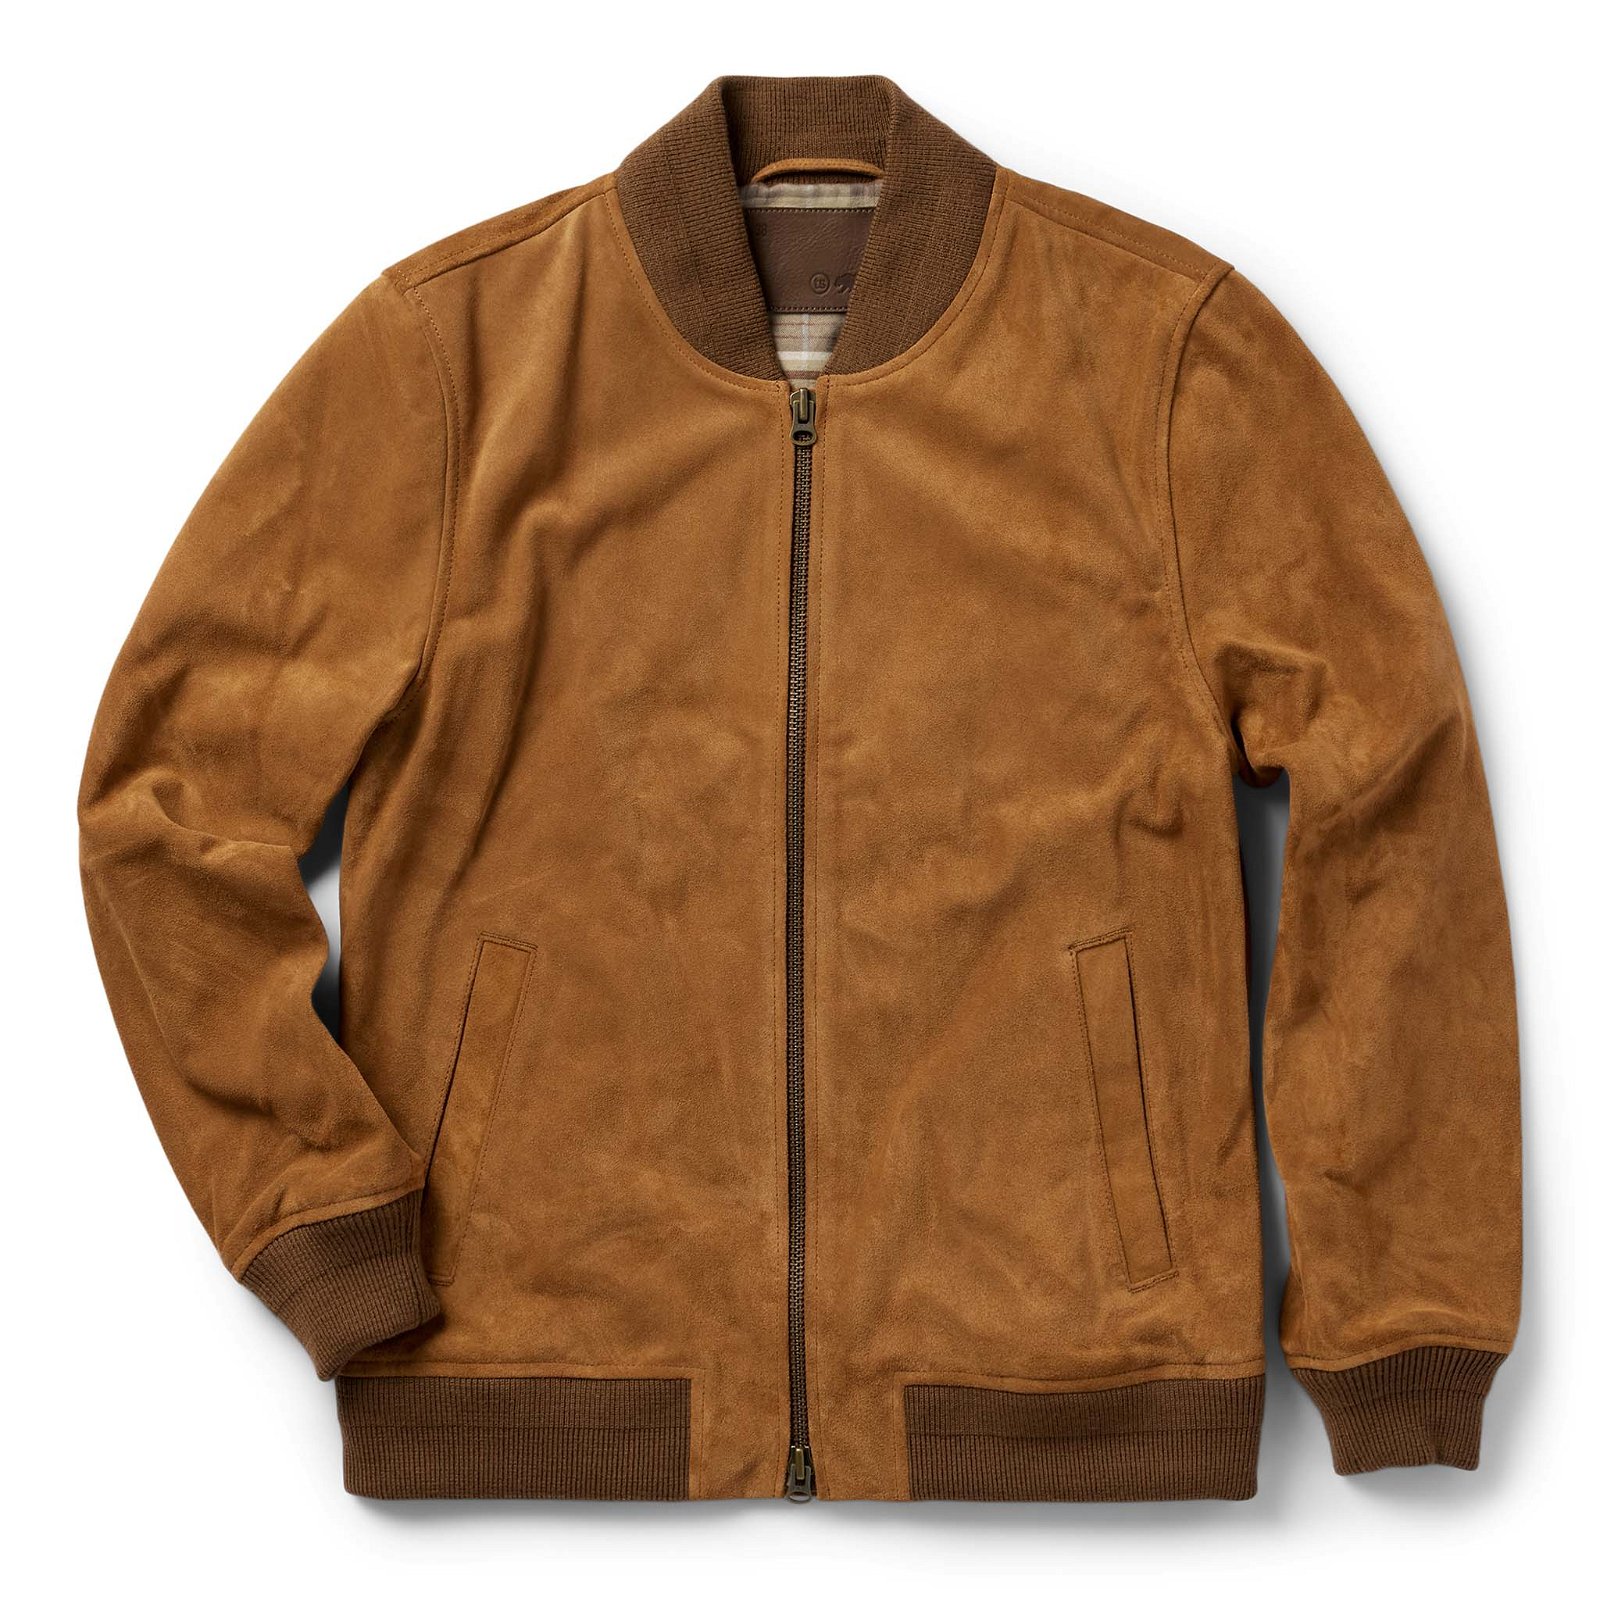 Image of The Bomber Jacket in Sierra Suede